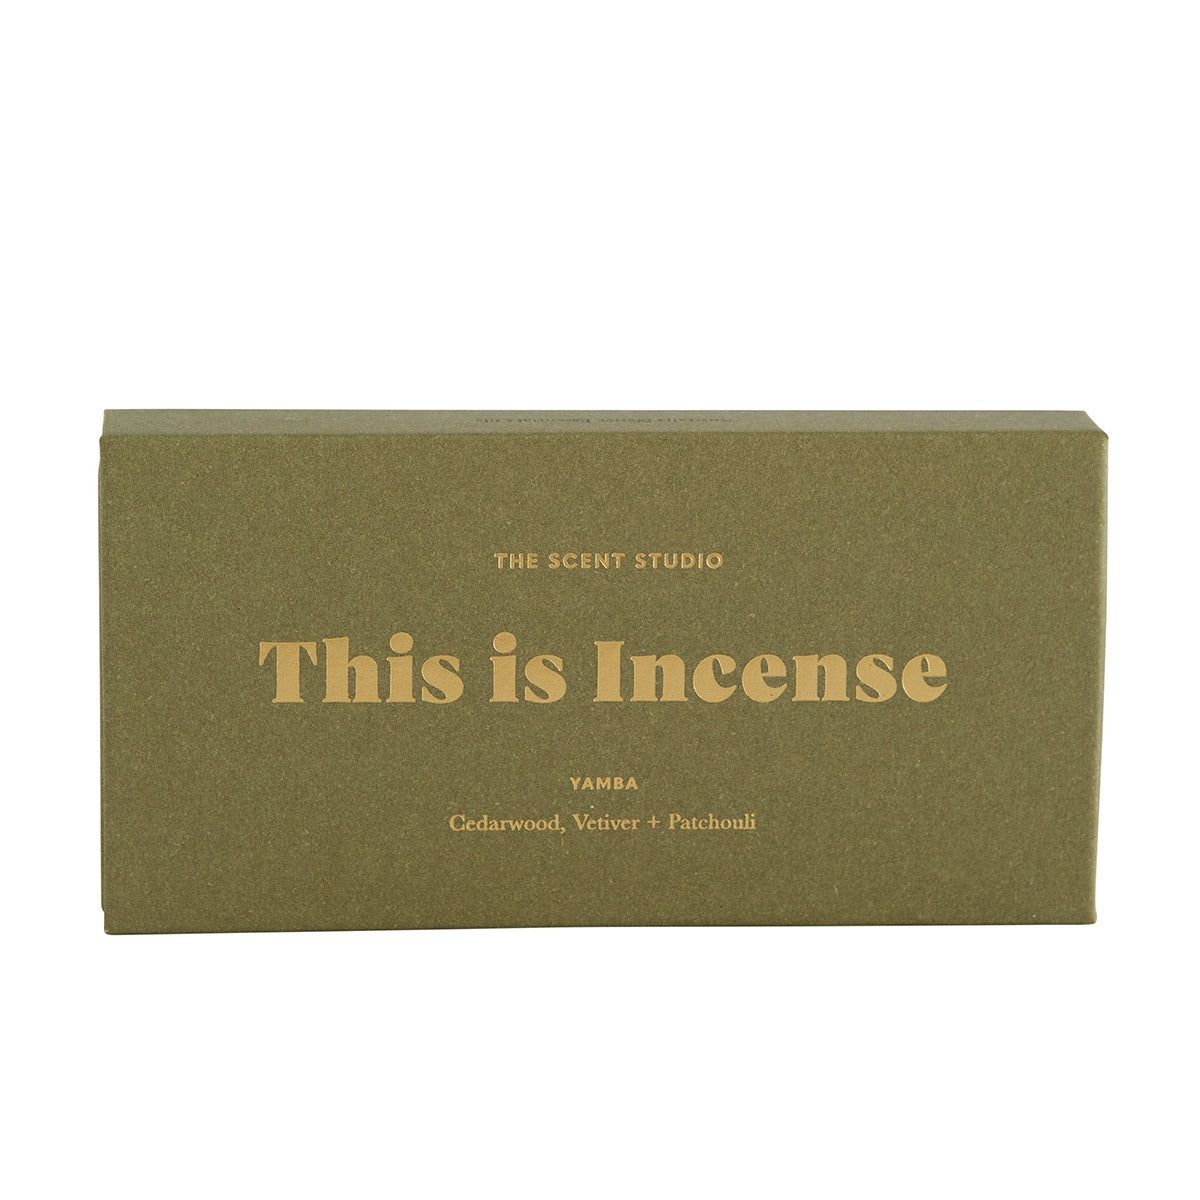 This is Incense - Yamba